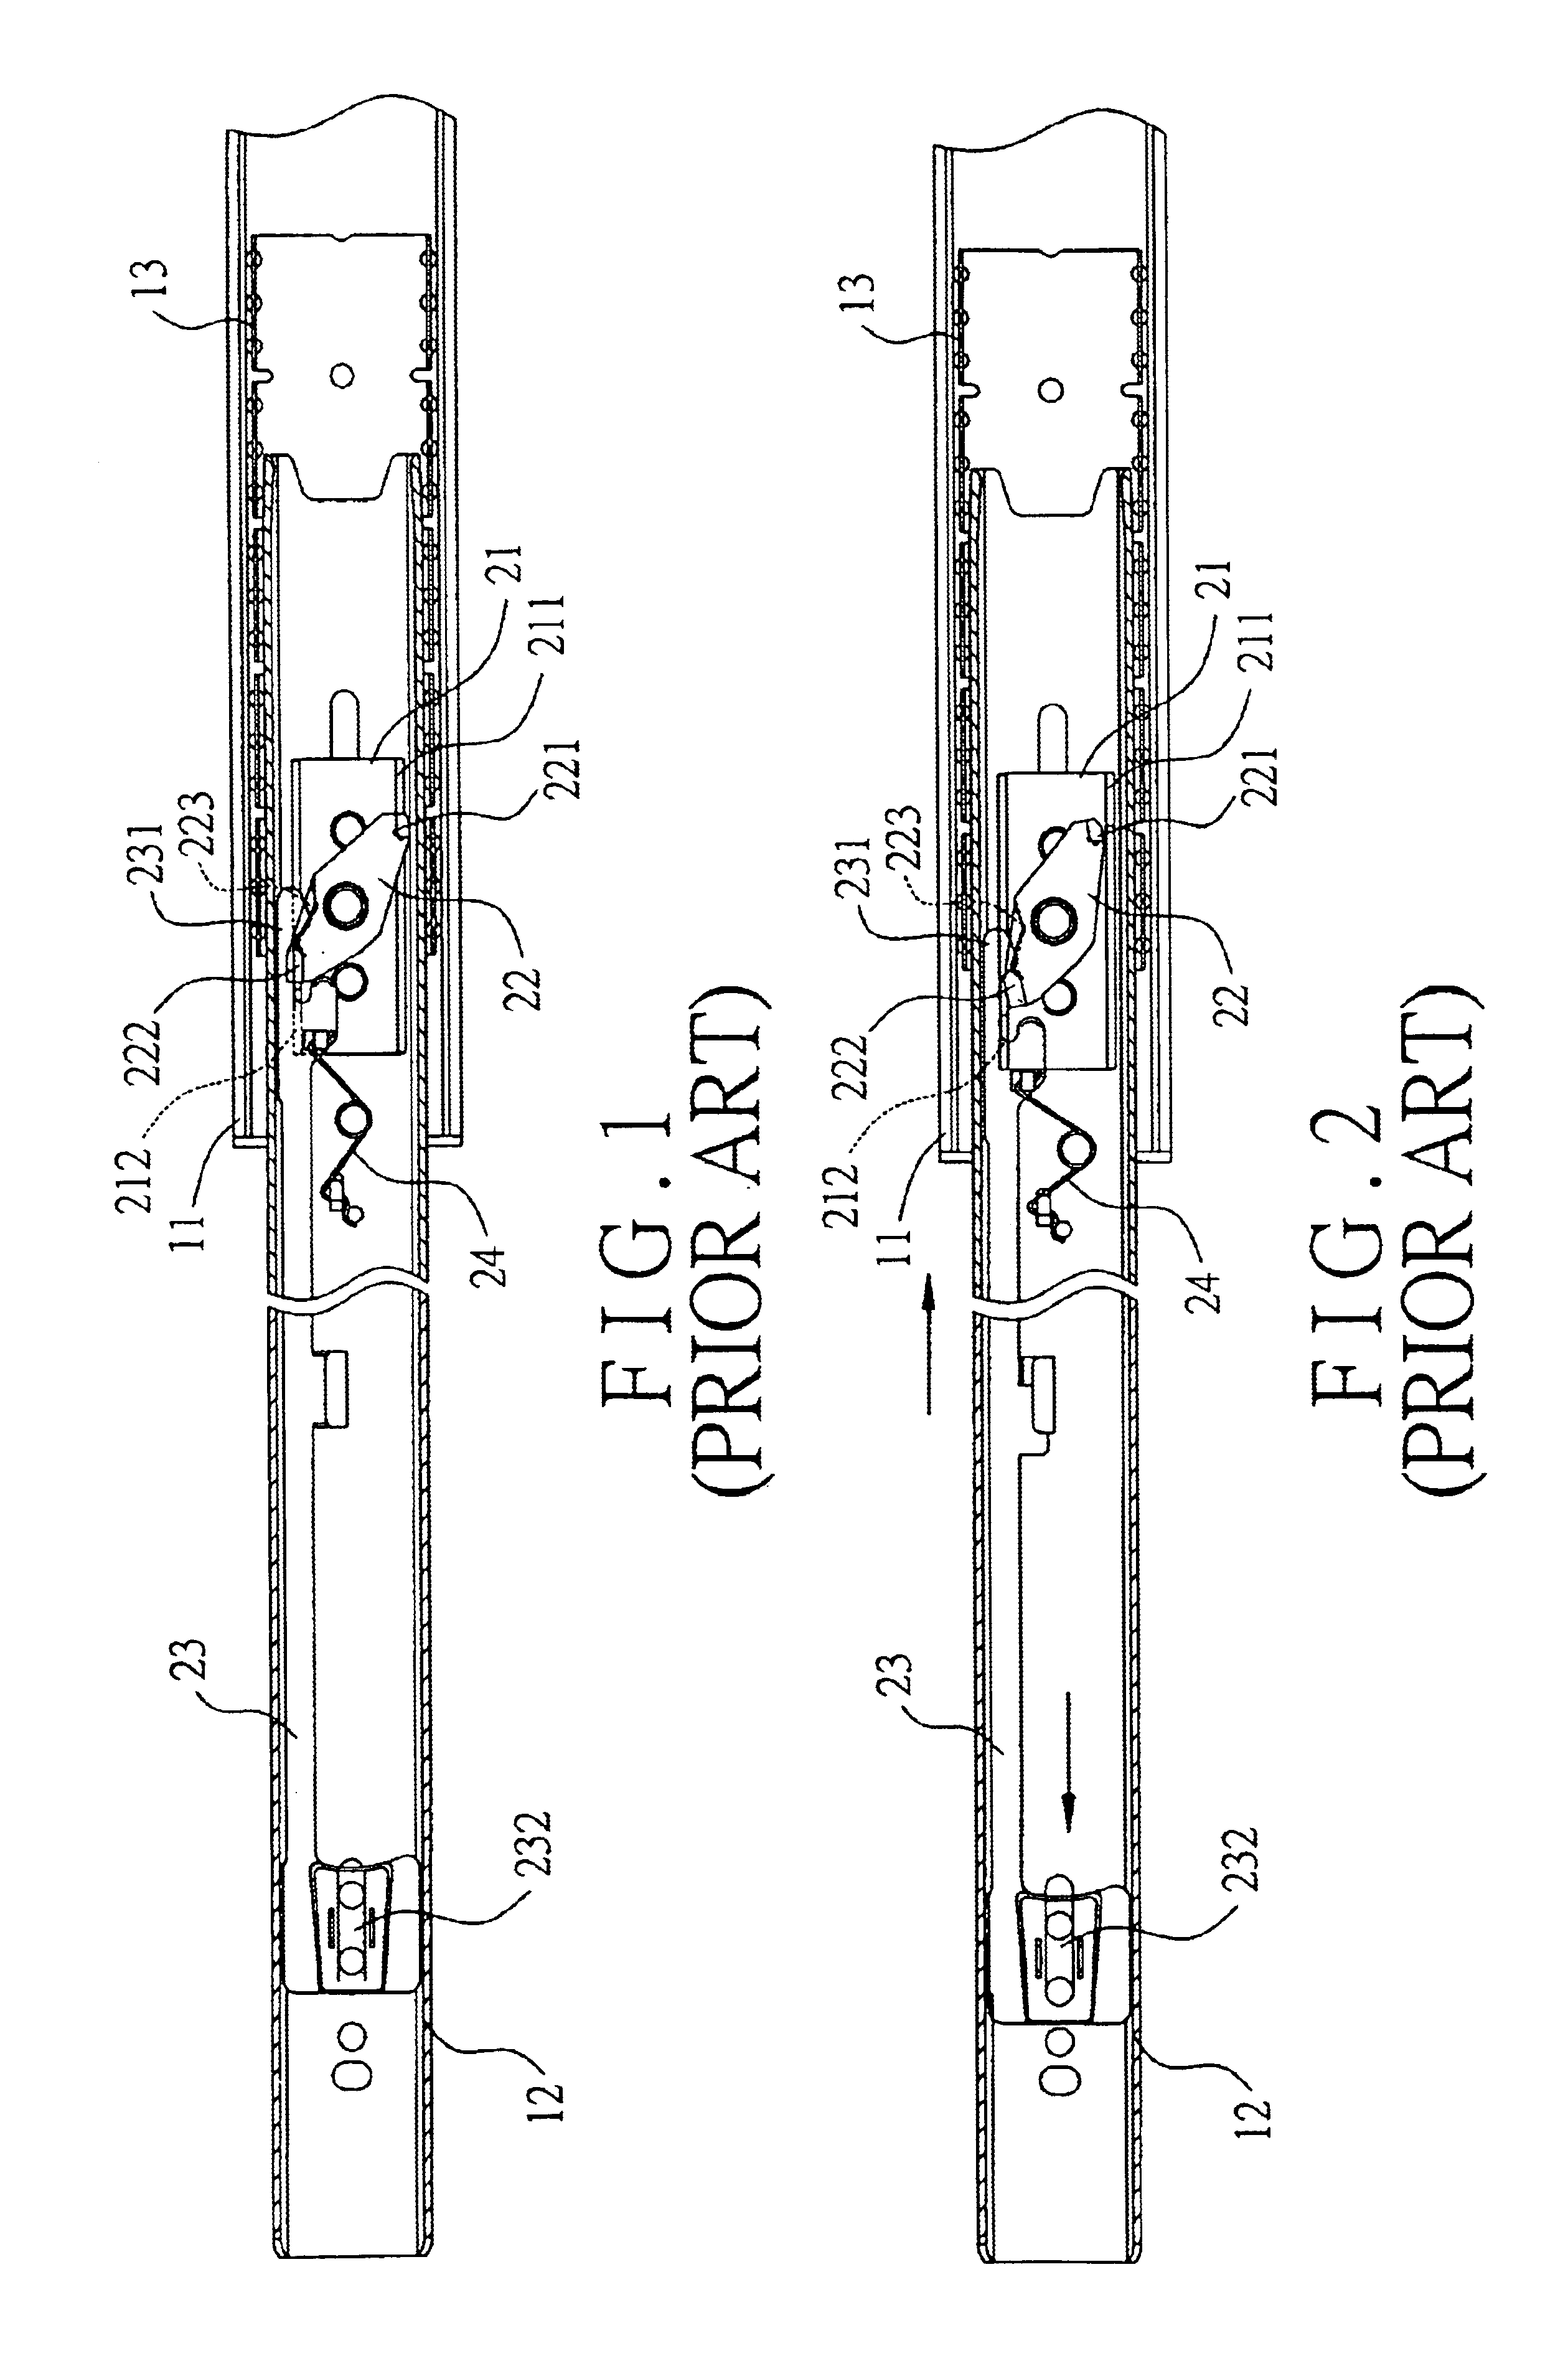 Retaining structure for a track device for drawers